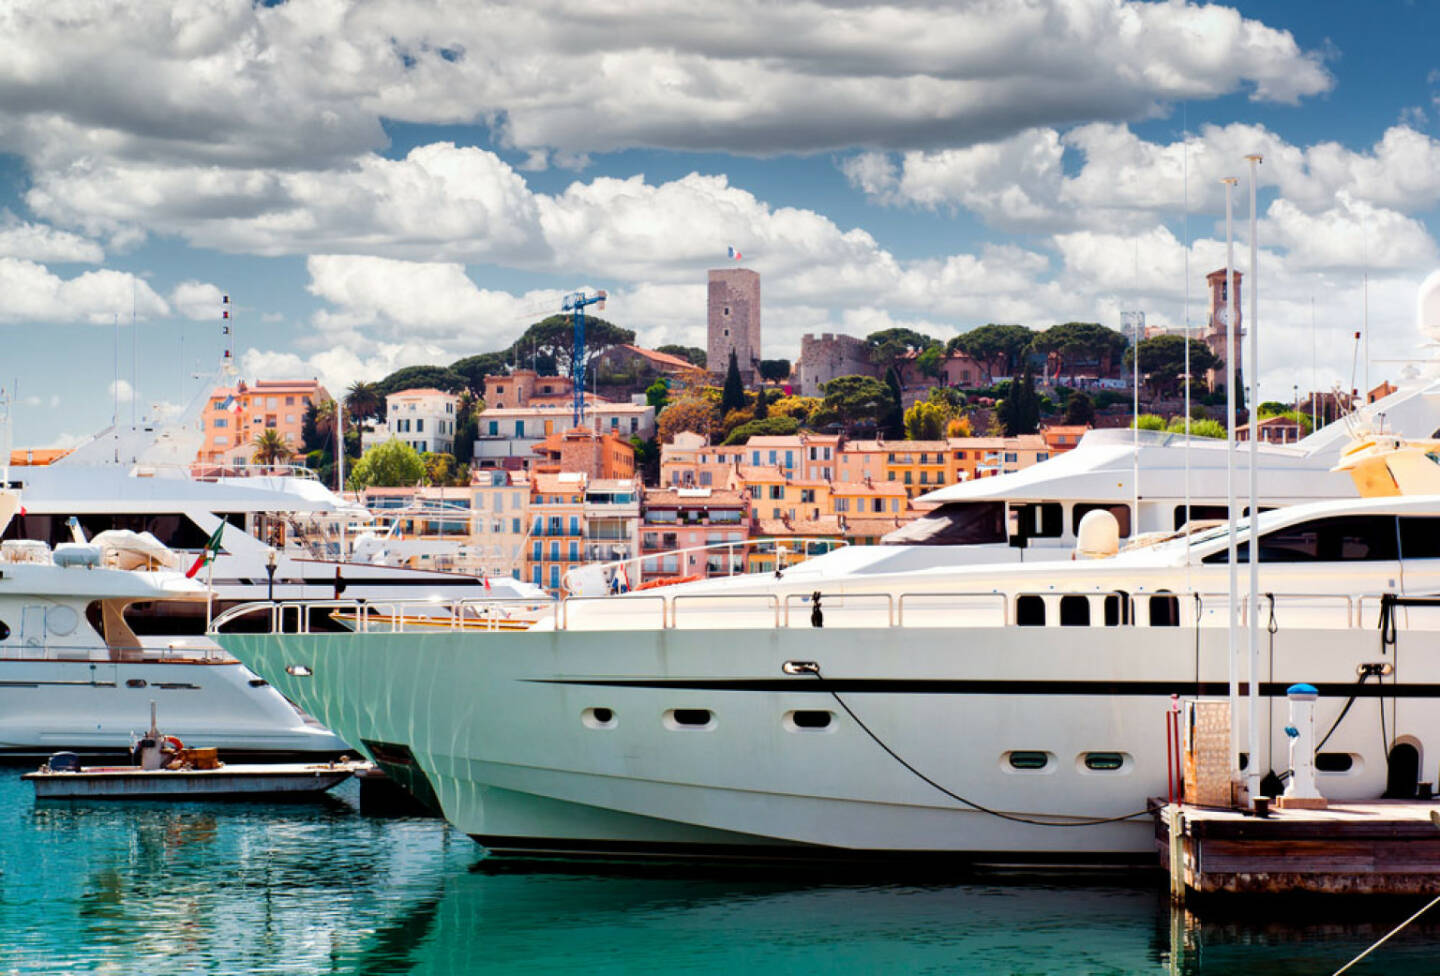 Cannes, Frankreich, Yacht, Boot, http://www.shutterstock.com/de/pic-137411216/stock-photo-view-of-le-suquet-the-old-town-and-port-le-vieux-of-cannes-france.html